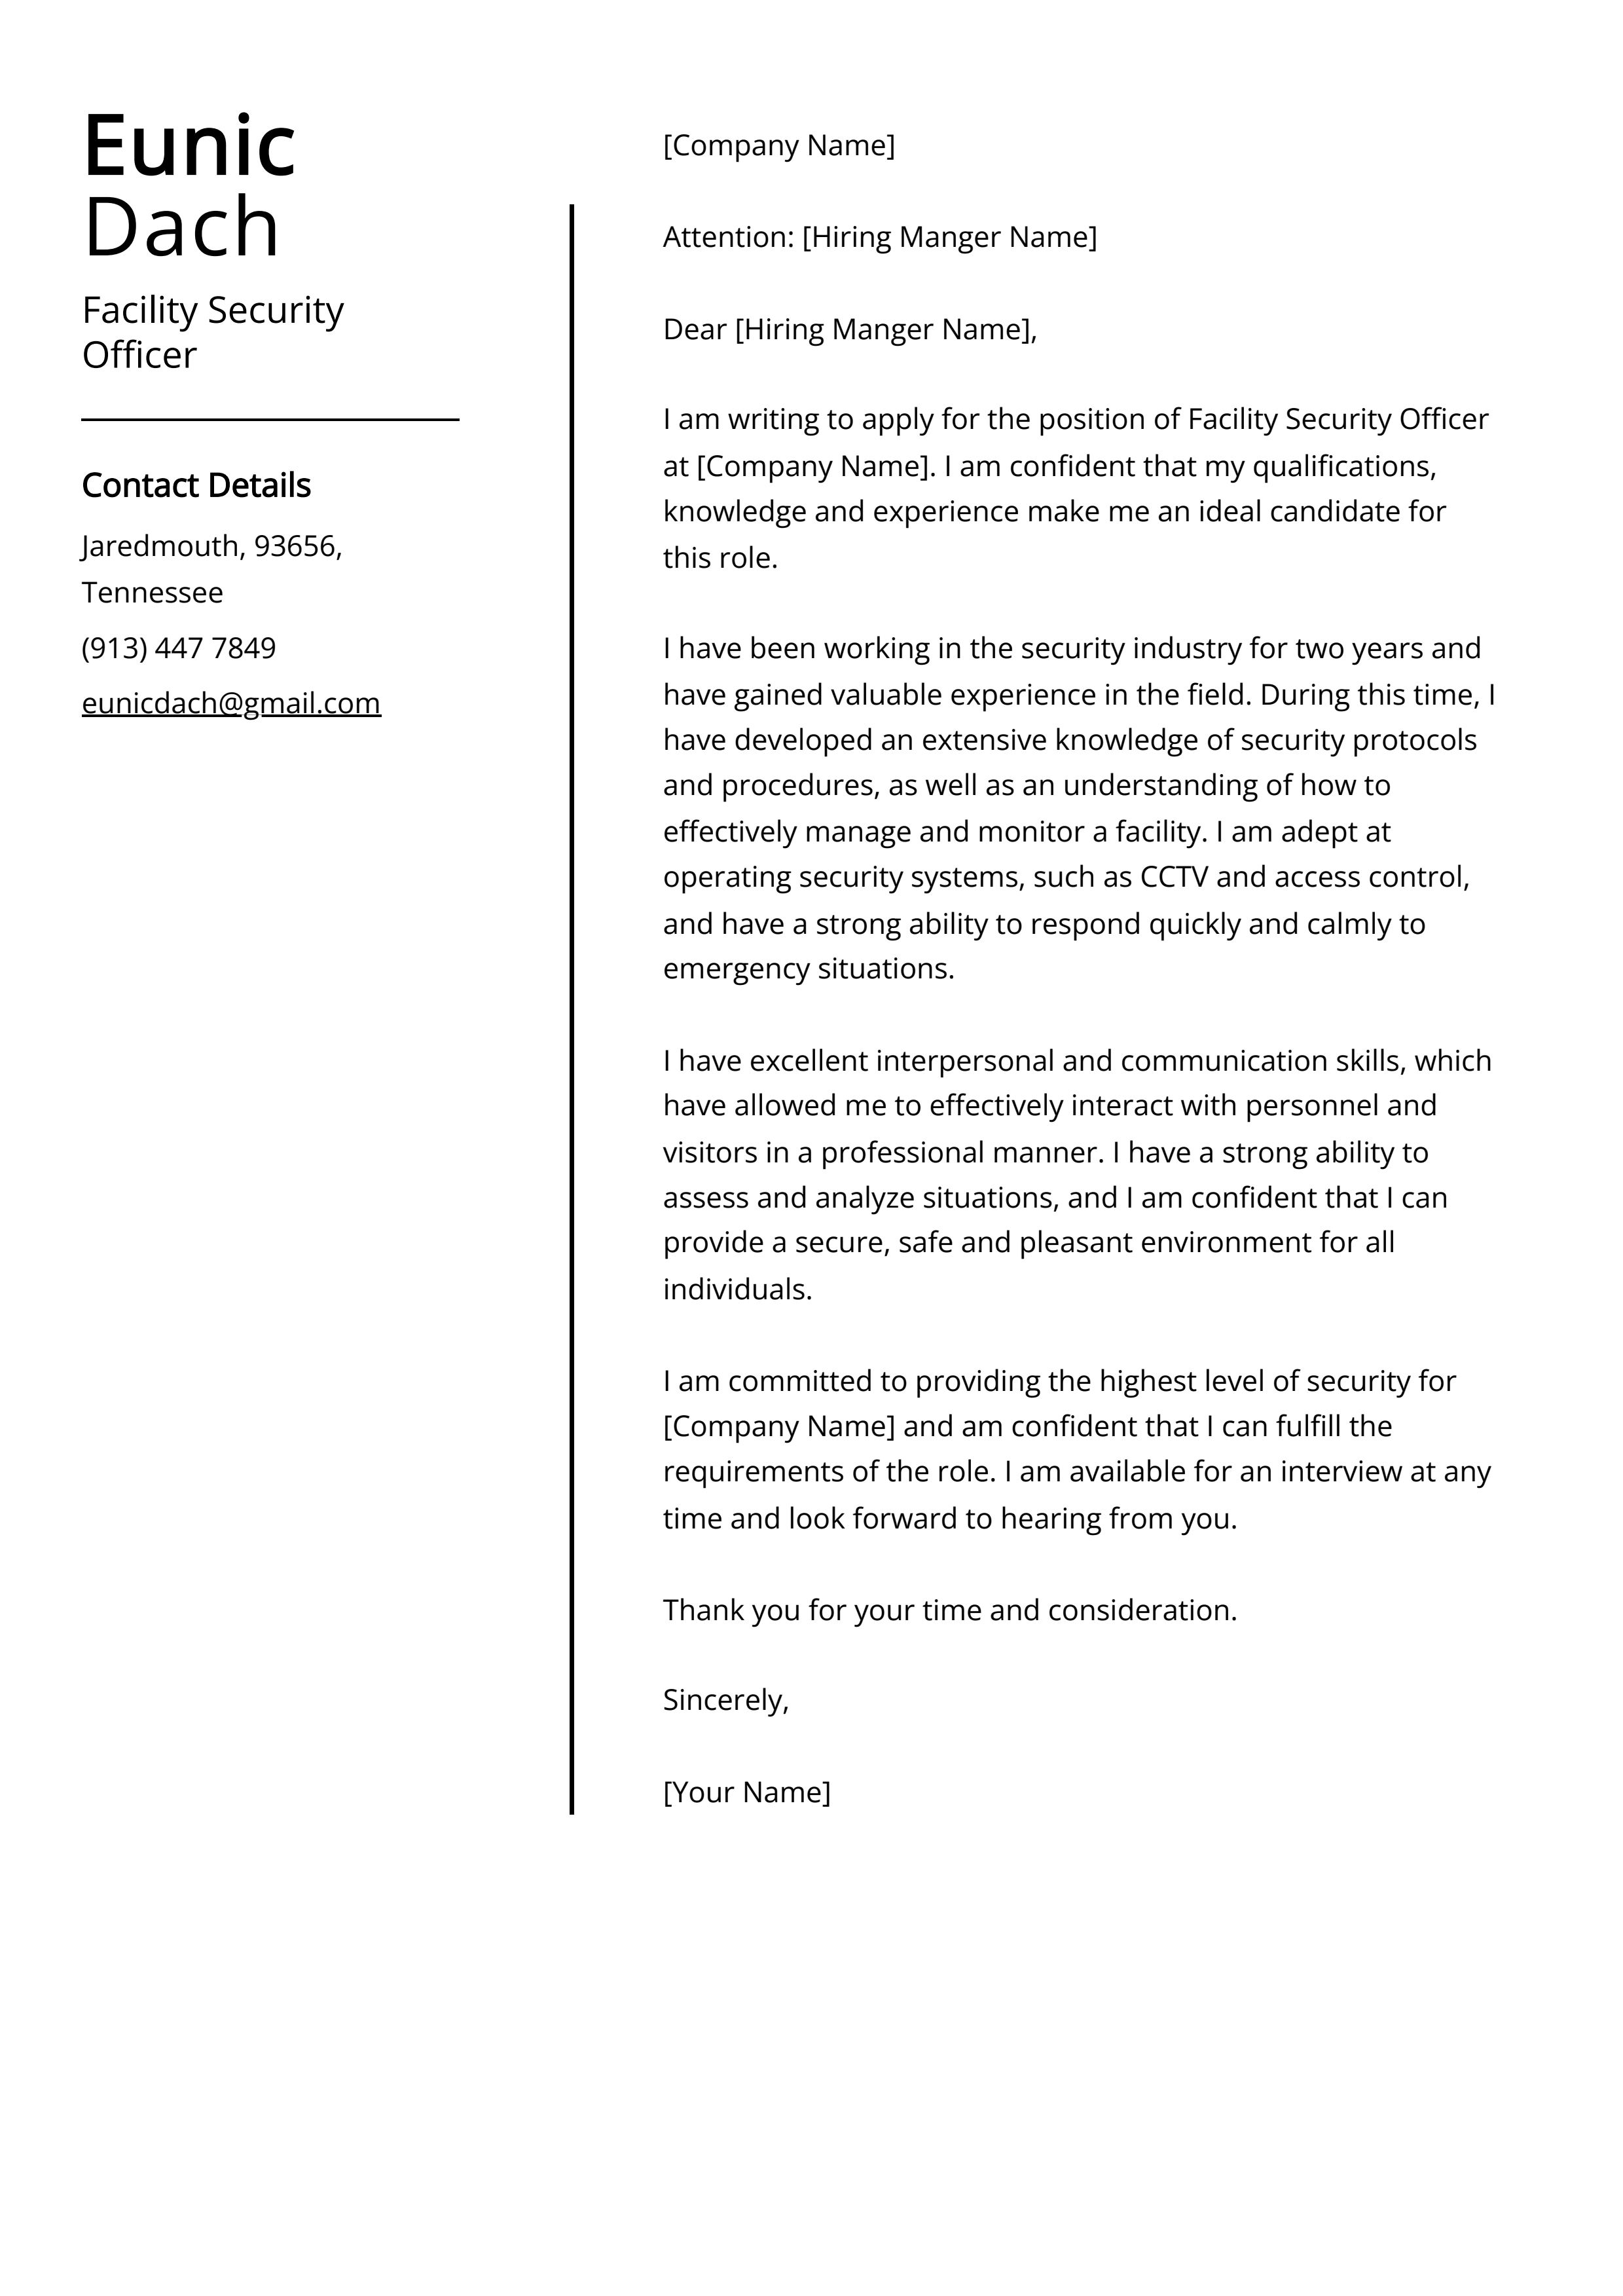 Facility Security Officer Cover Letter Example